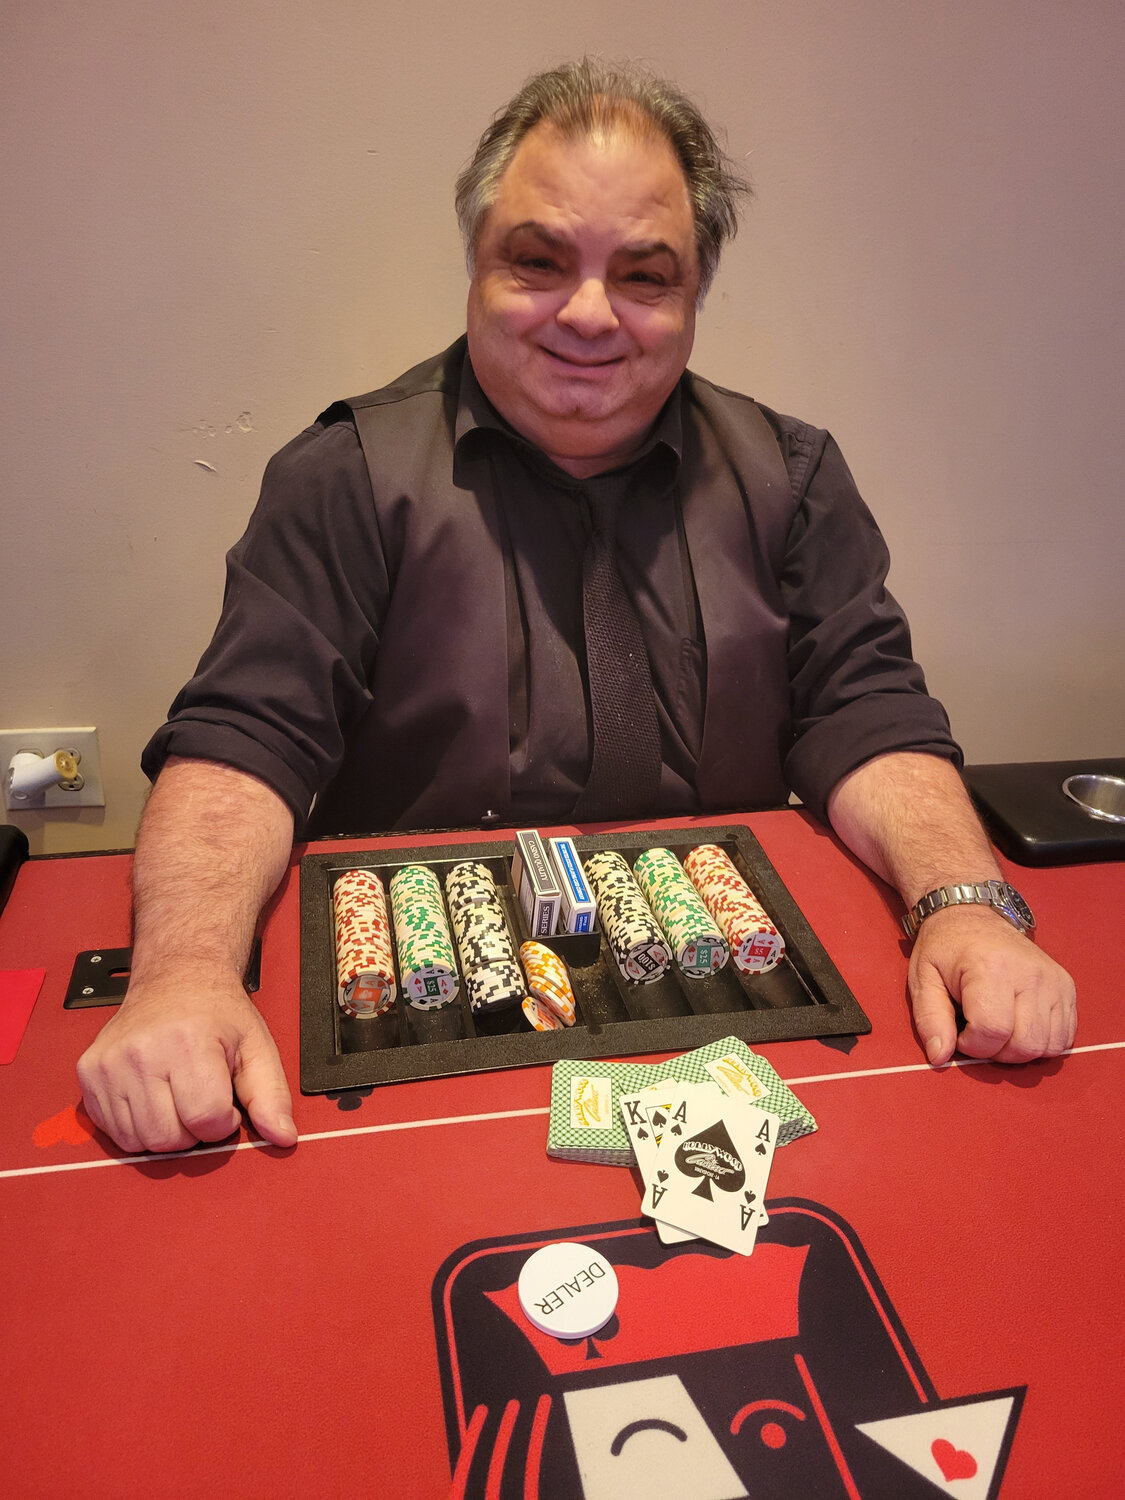 Poker dealer Rocco Maggi prepares for a game at the chamber gala Friday.